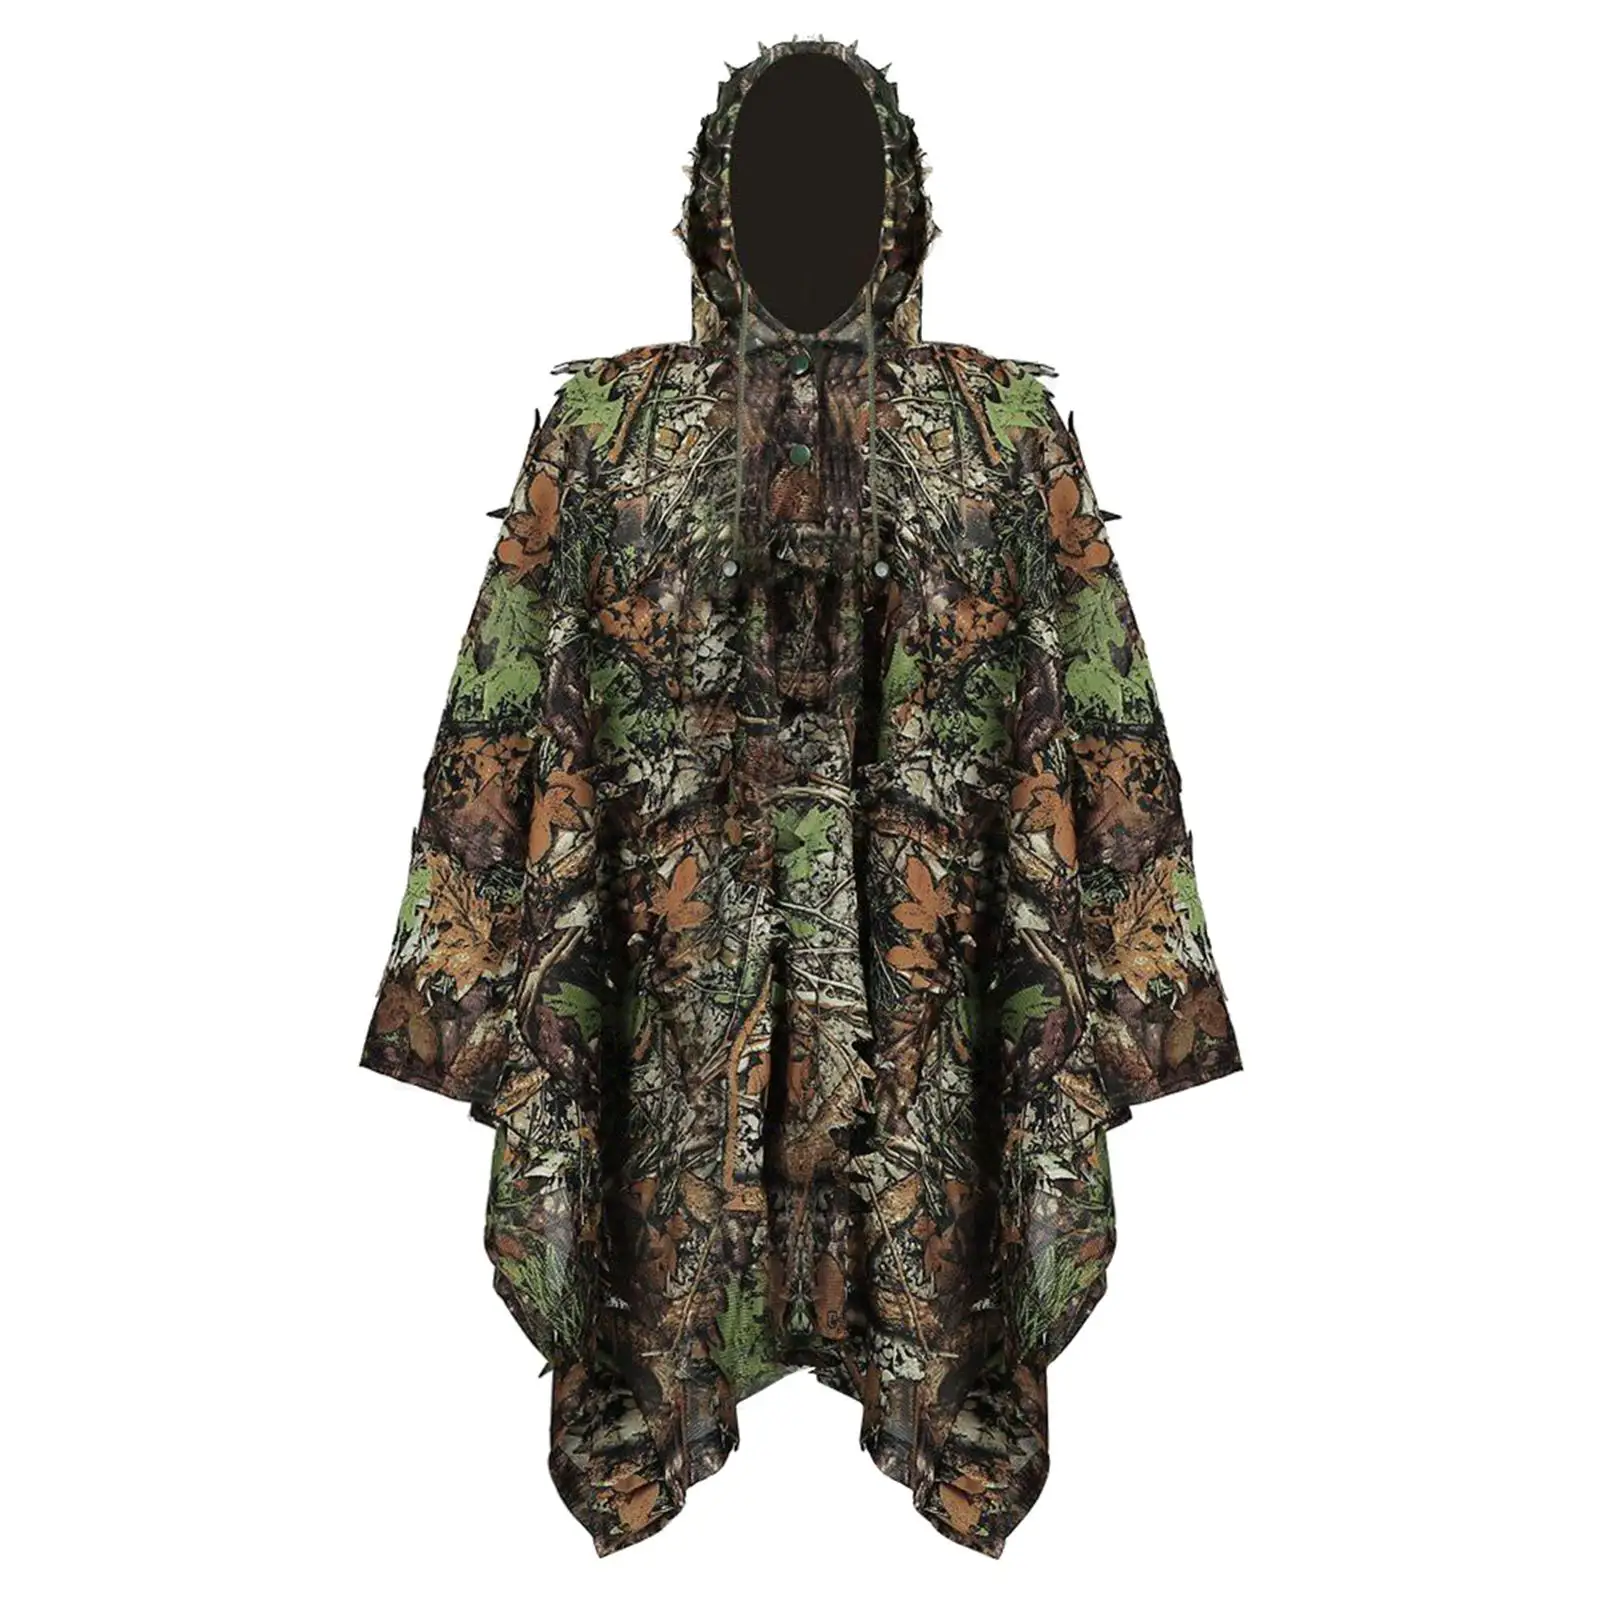 Ghillie Suit Lightweight Camo Suit for Photography Costume Turkey Hunting